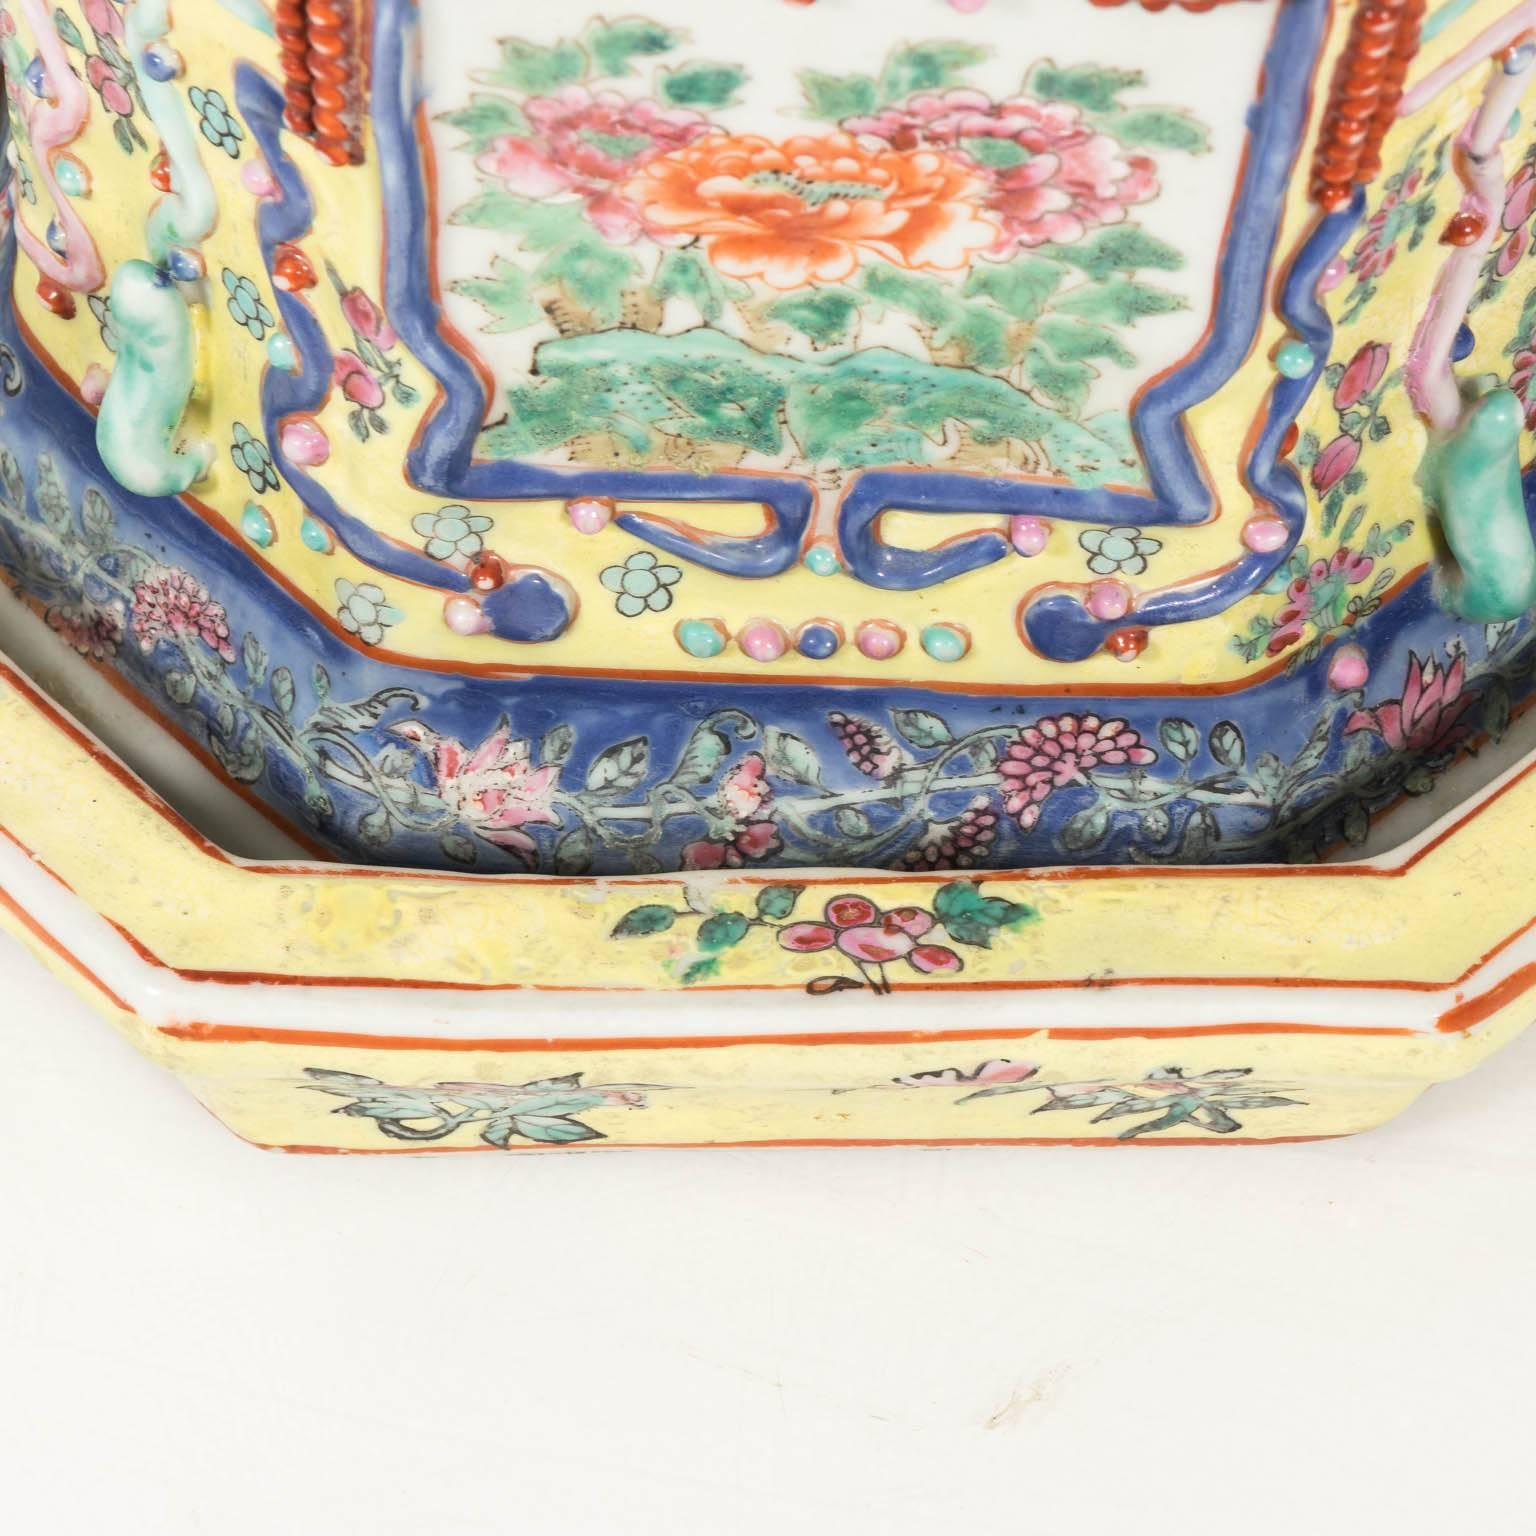 19th century Chinese painted cachepots with Chinese figures, floral motifs, and matching detachable bases.